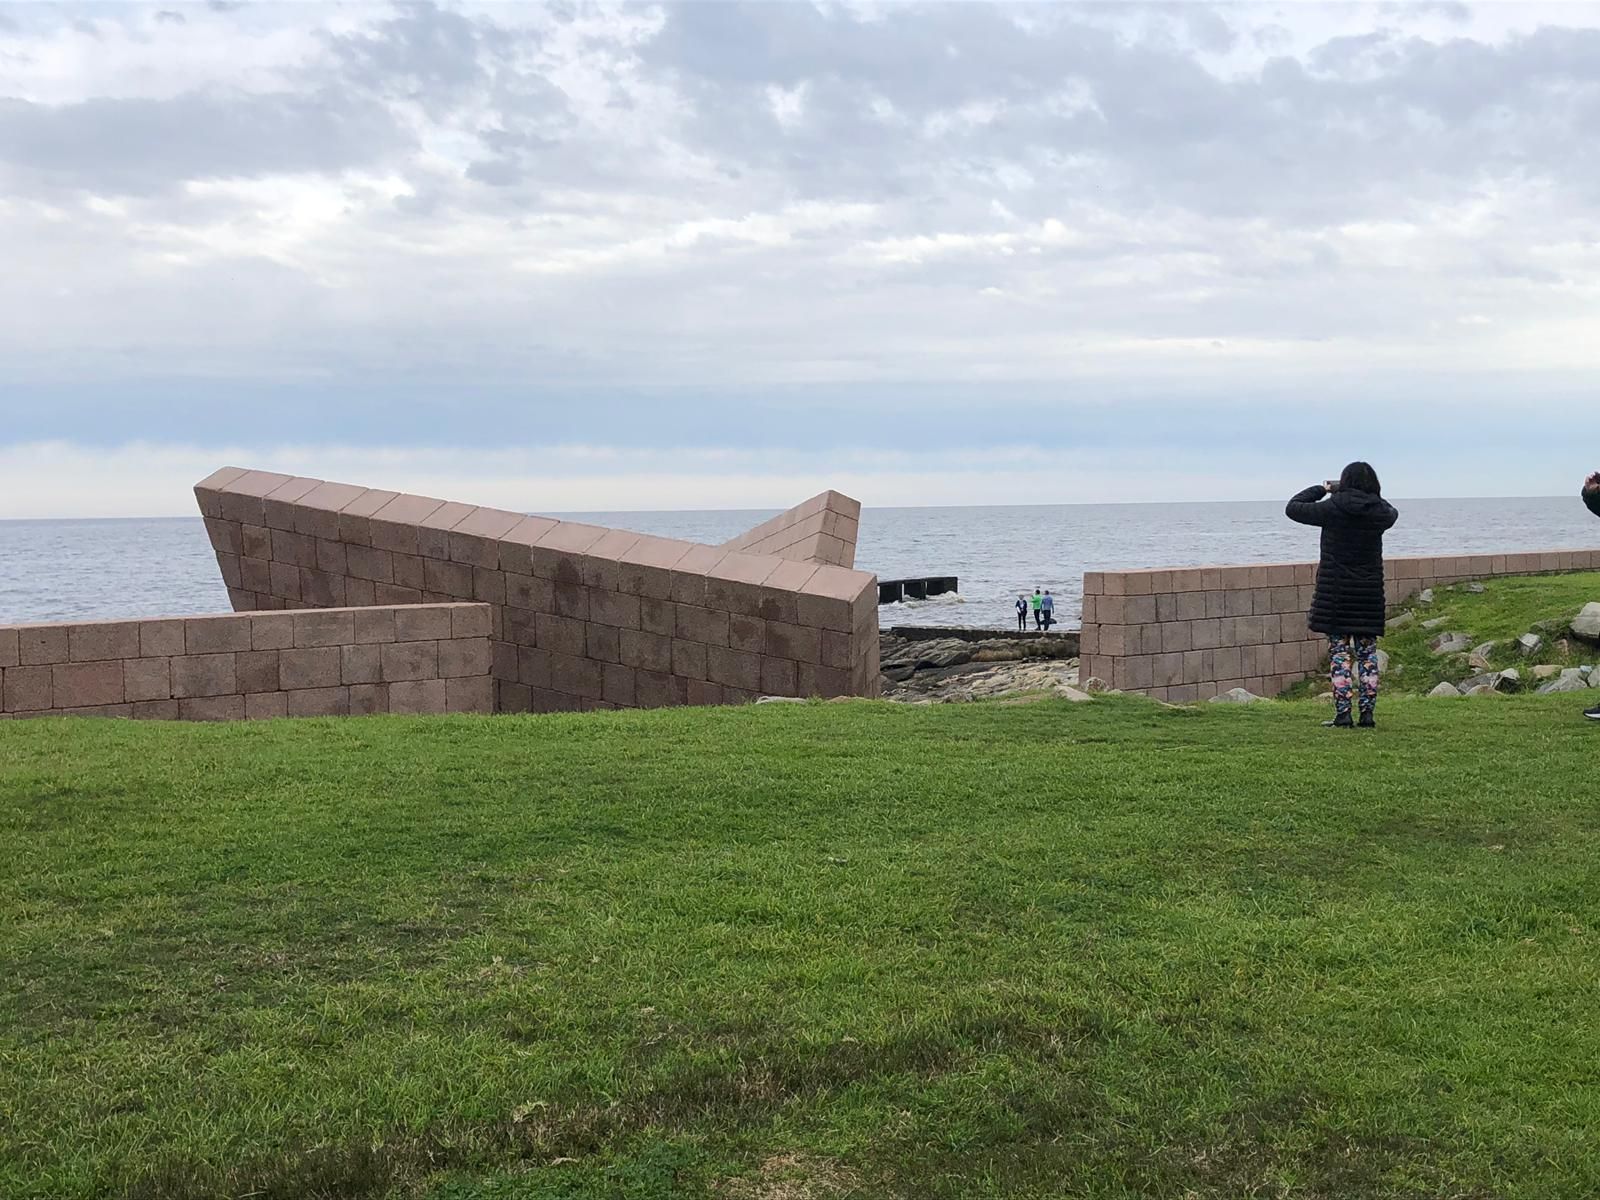 Holocaust Memorial by the Sea